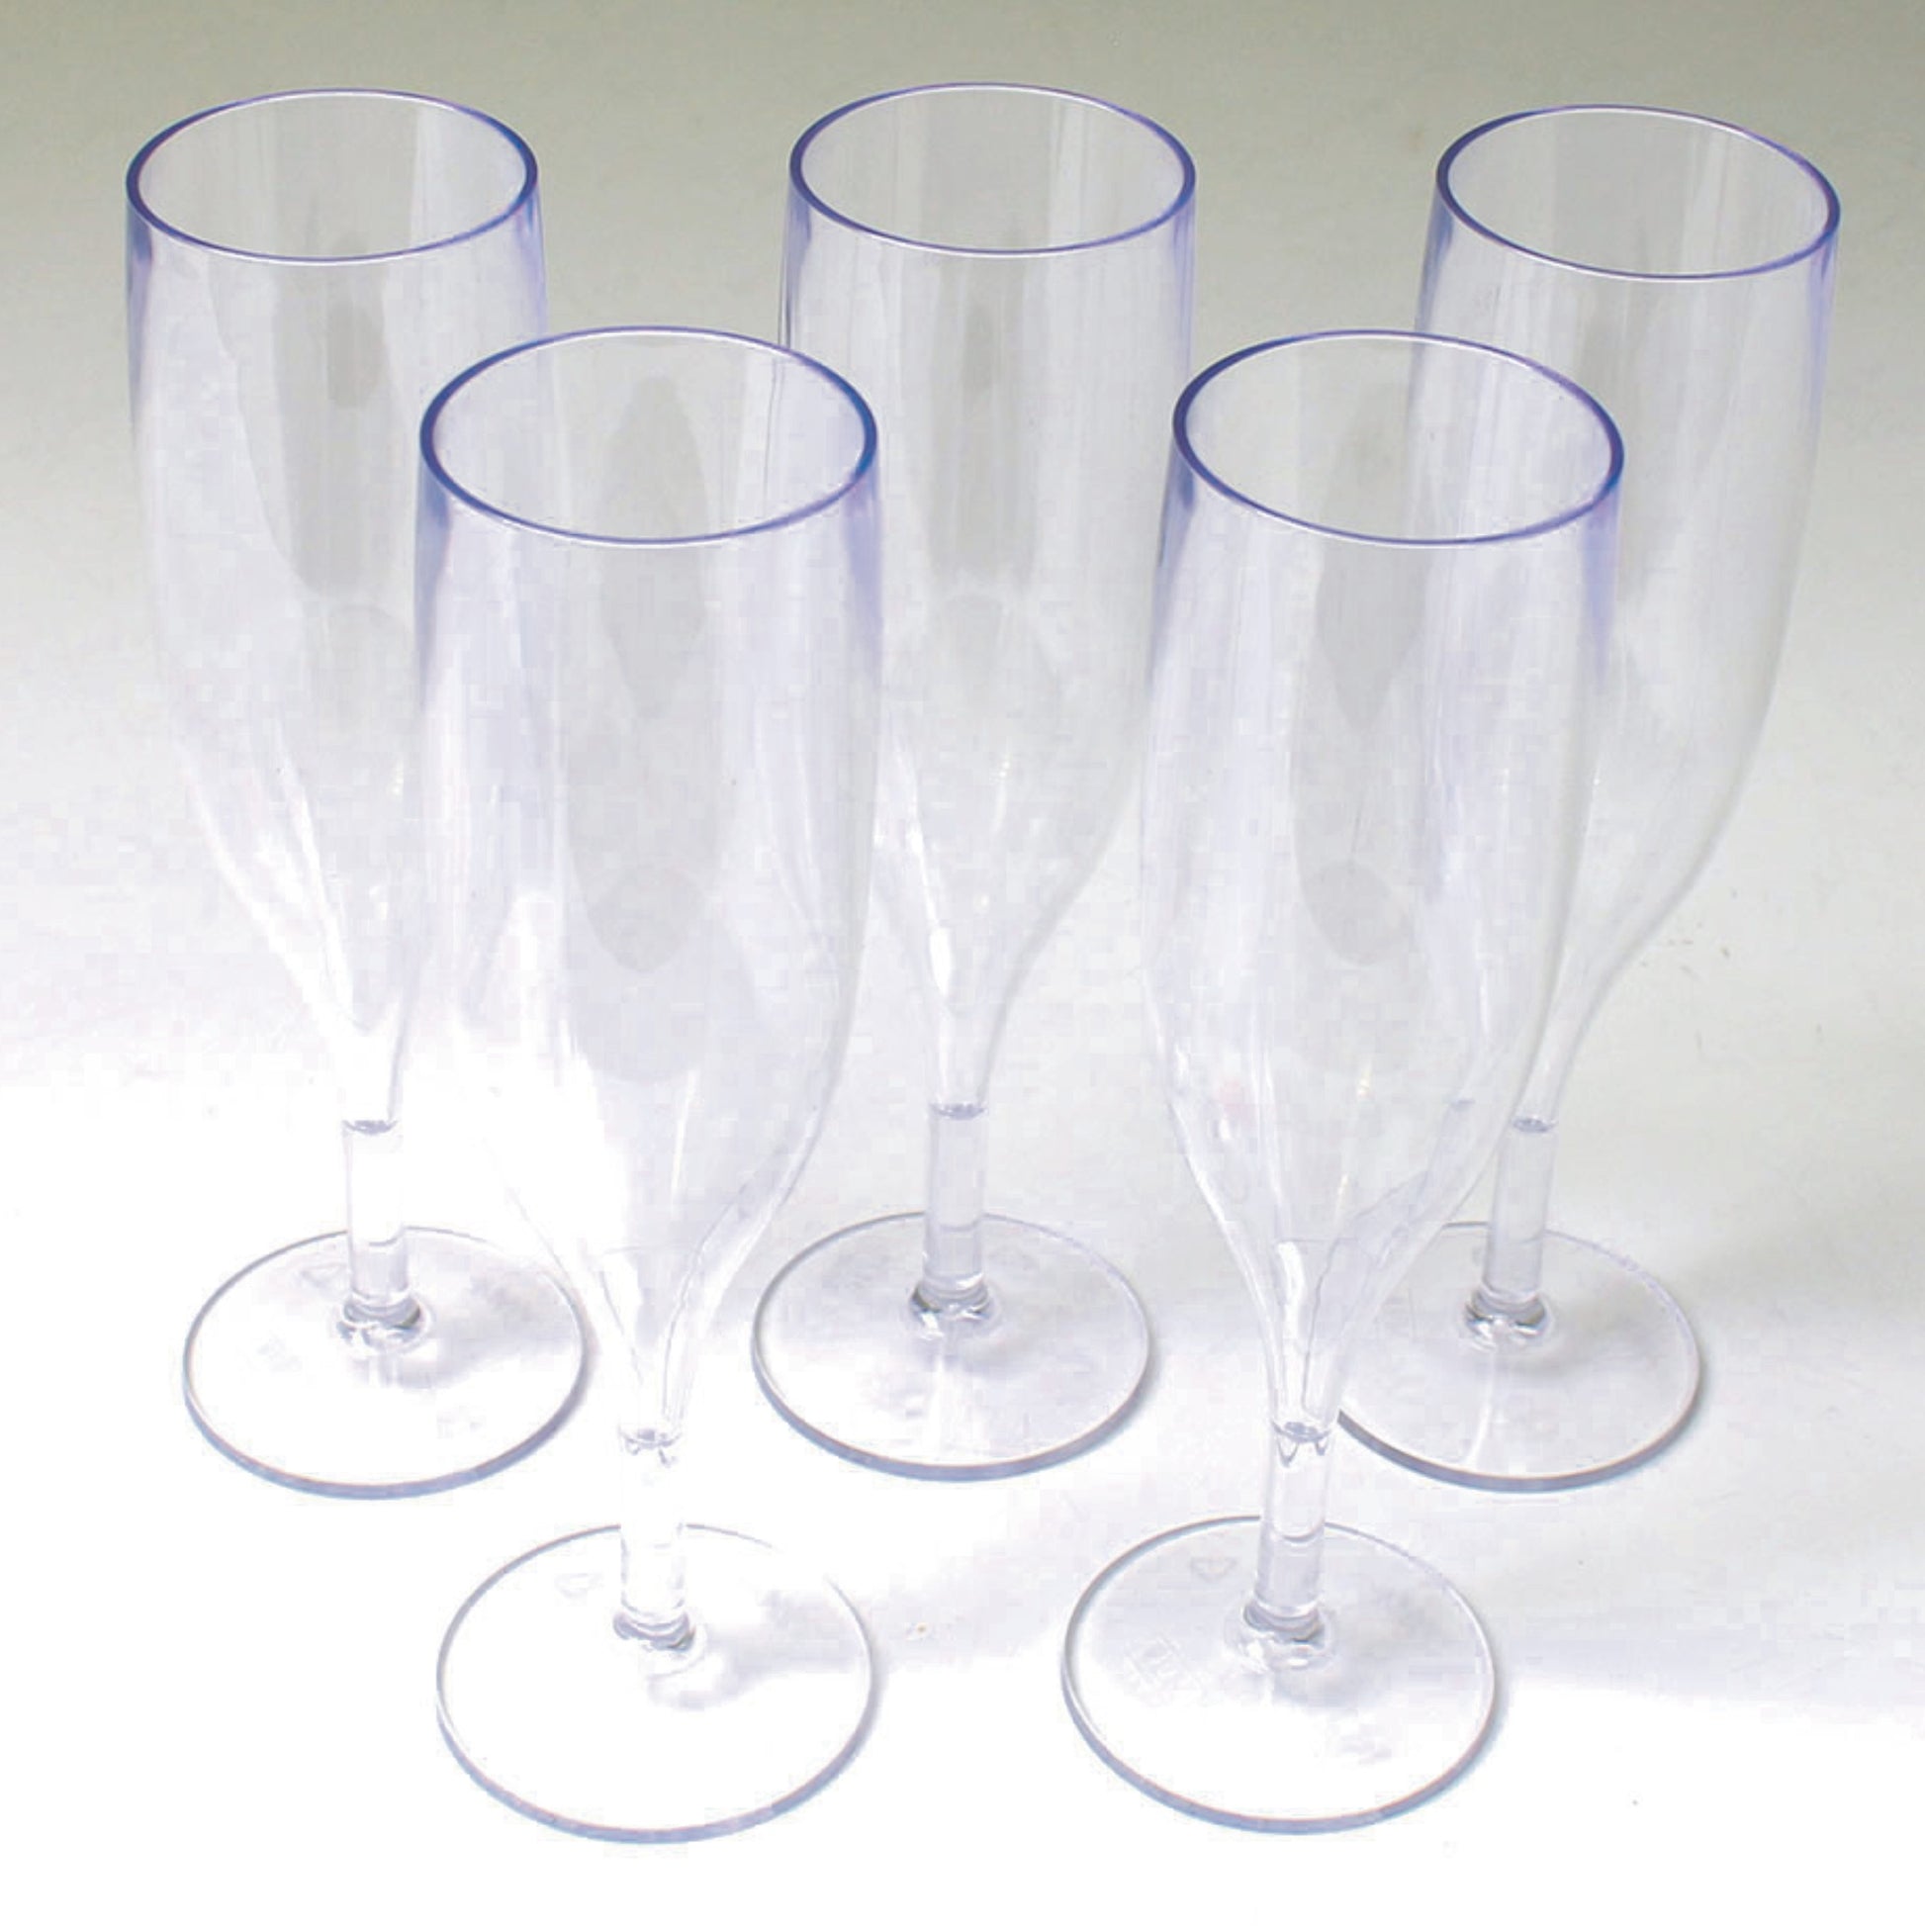 25 x Clear Prosecco Flutes – 175ml CE 125ml marked, made from Strong Reusable Plastic in glossy Transparent 1-Piece Champagne Glass Pack-5056020186977-EY-PP-130-Product Pro-Clear Champagne Flutes, Clear Flutes, Clear Prosecco Flutes, Reusable Flutes